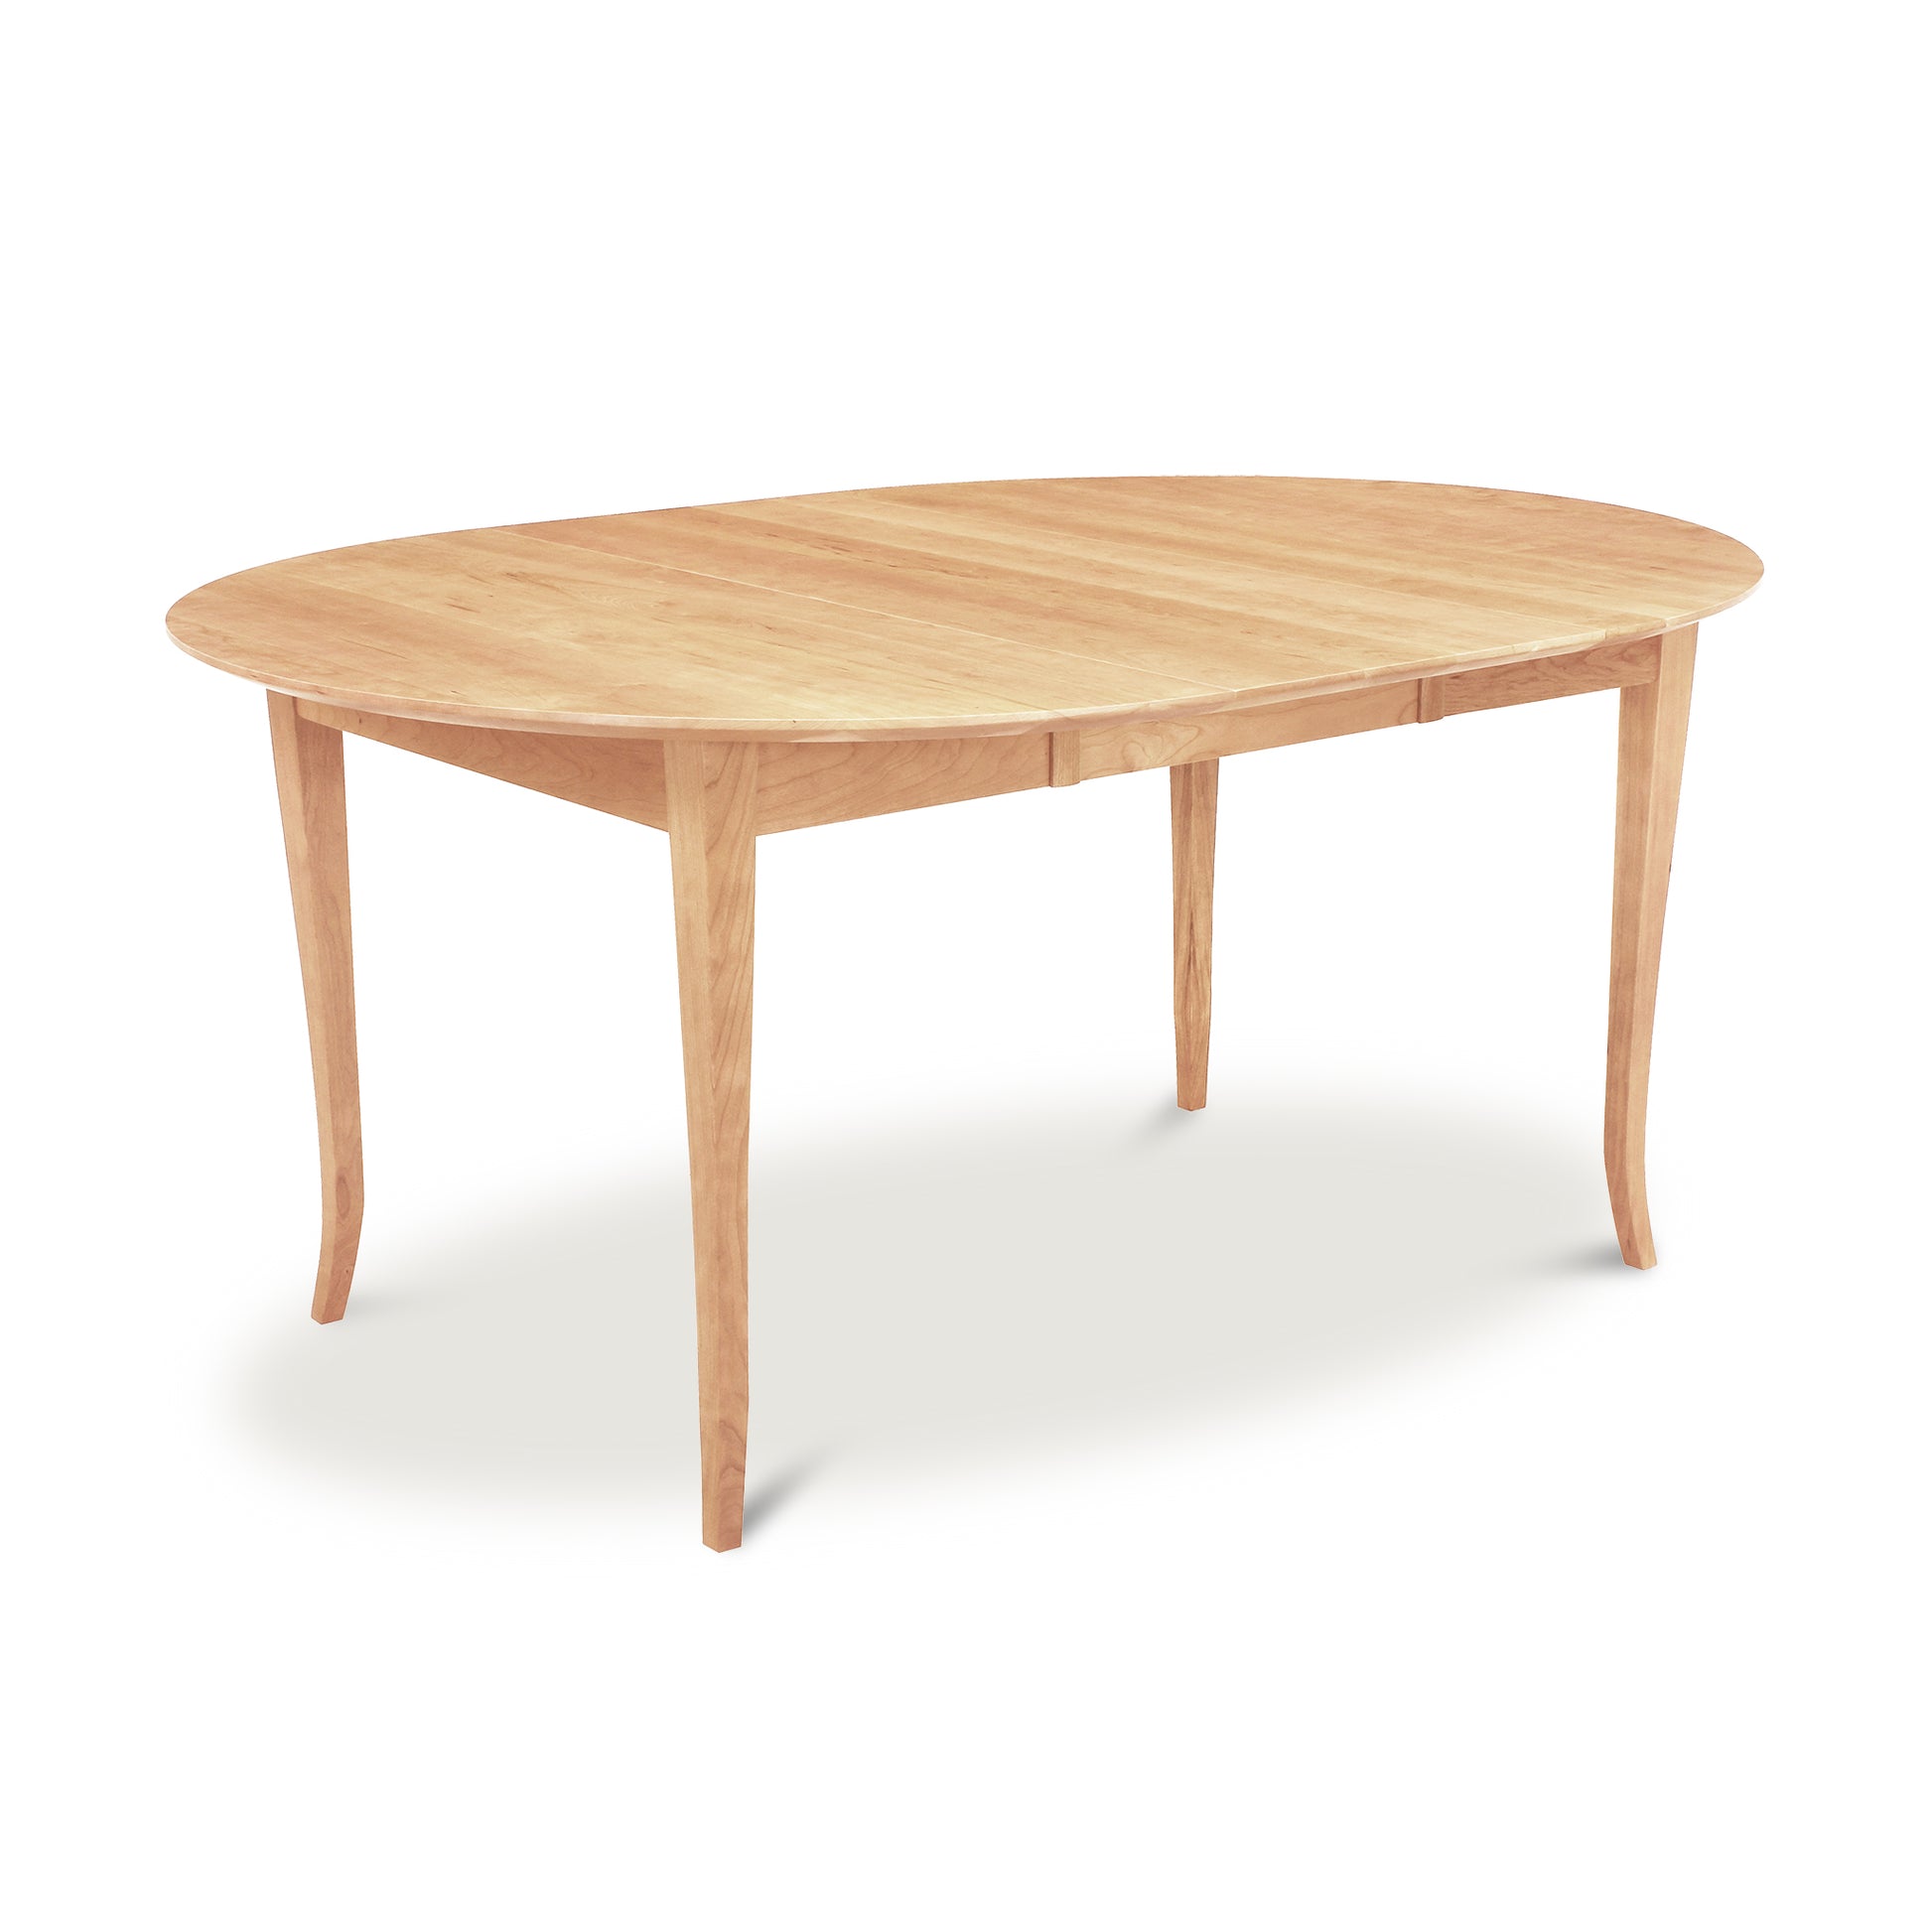 A sustainable Classic Shaker Flare Leg Round Extension Table with a wooden base, handmade in Vermont by Lyndon Furniture.